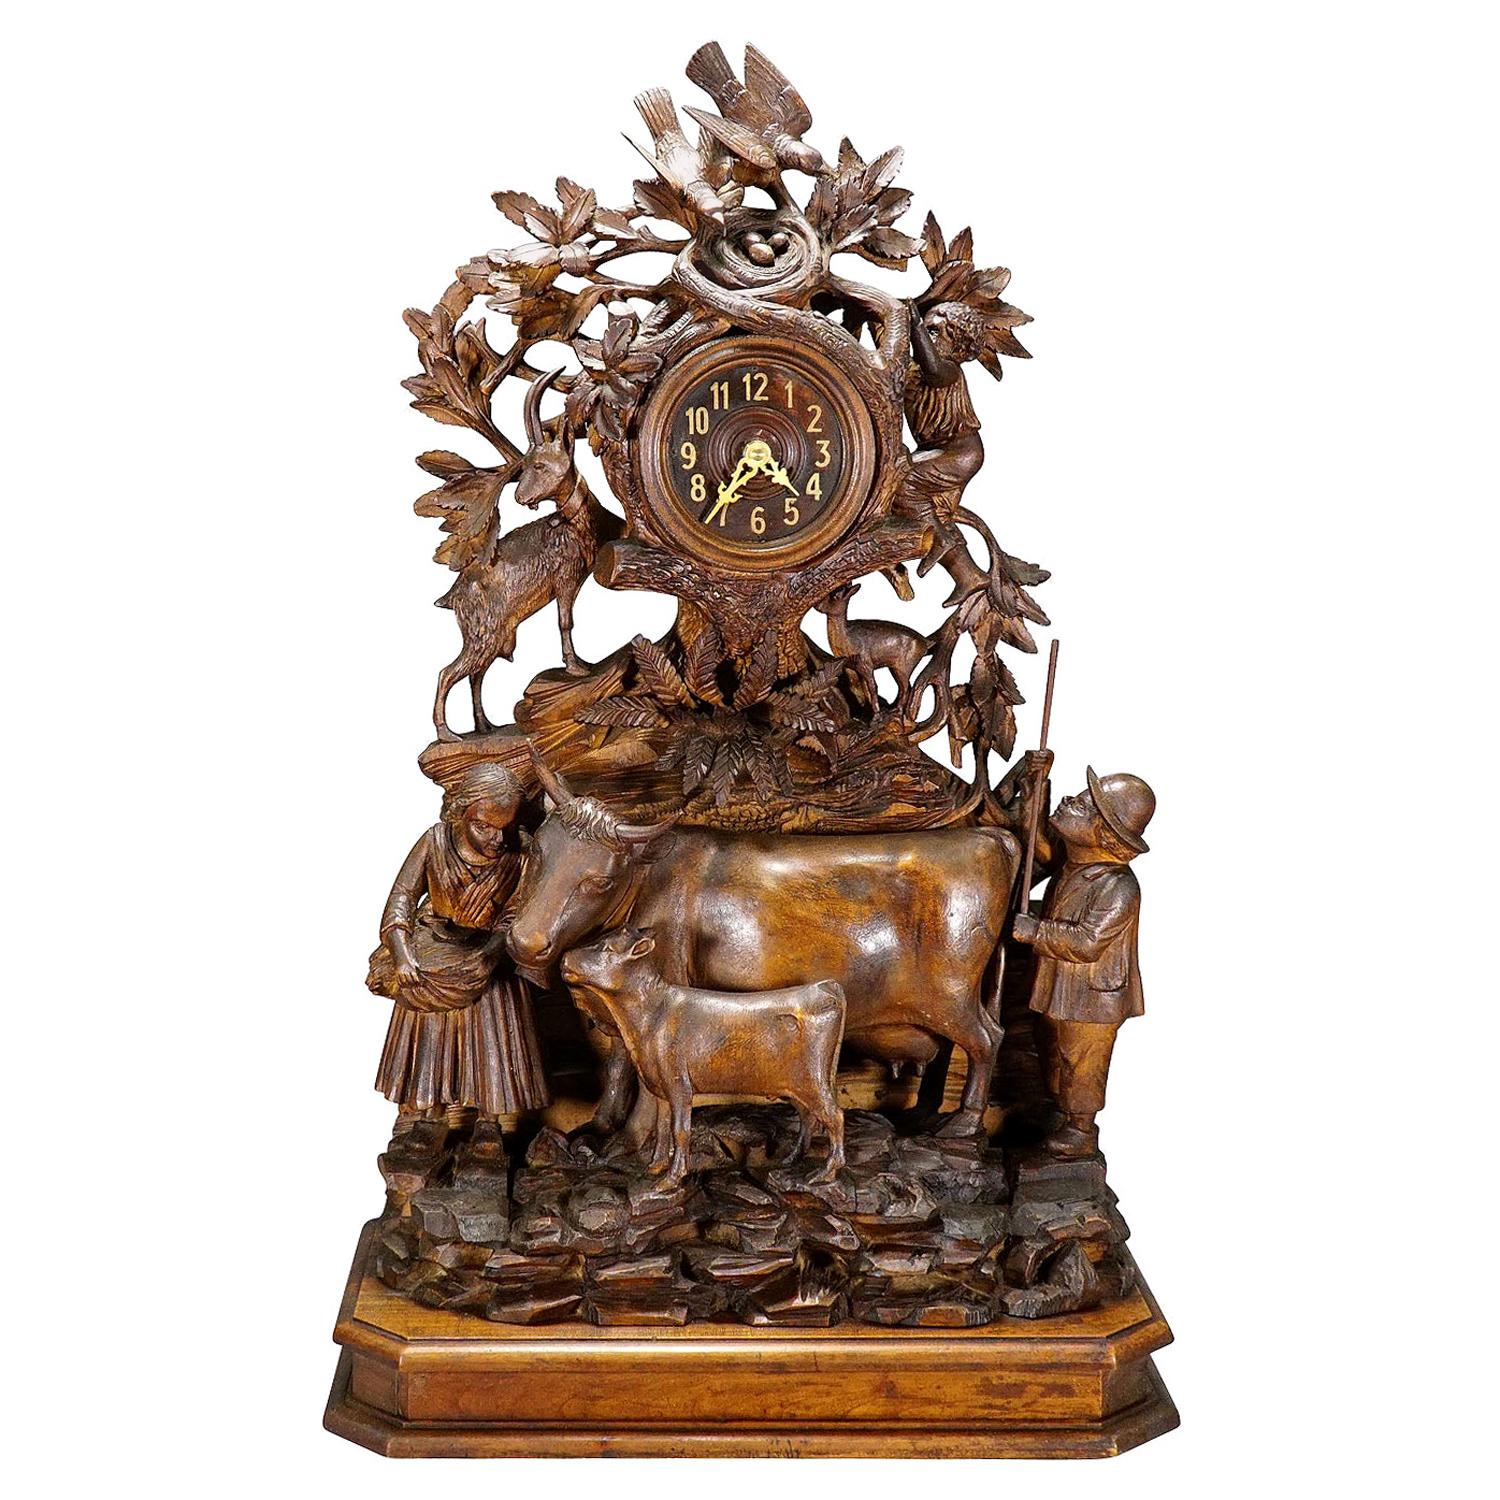 Antique Mantel Clock with Herdsman Family, Goats and Cows